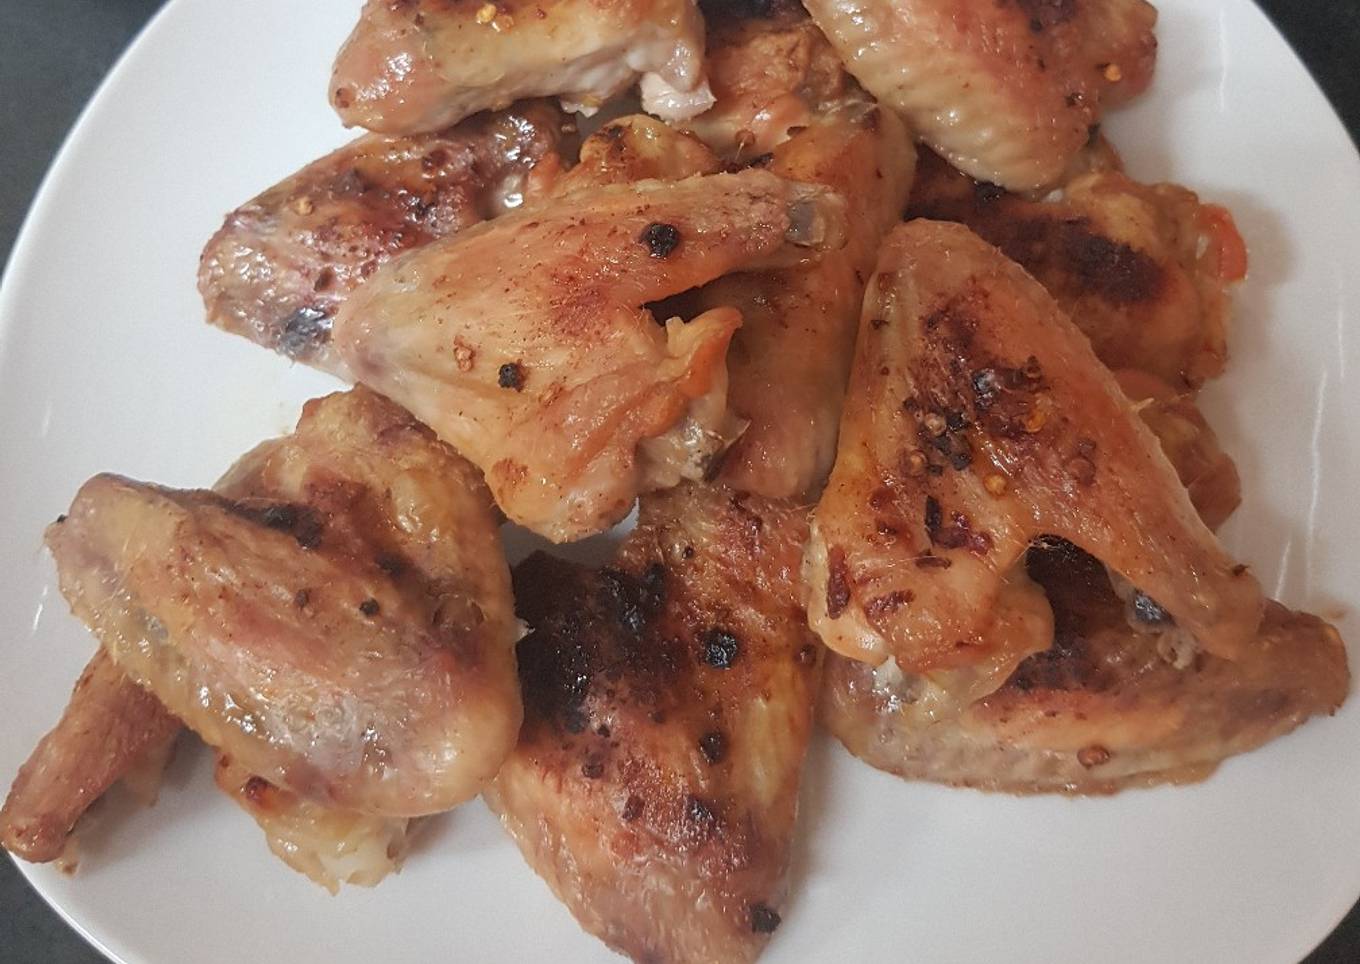 My Chinese Salt & Pepper Sesaoned Chicken Wings😘